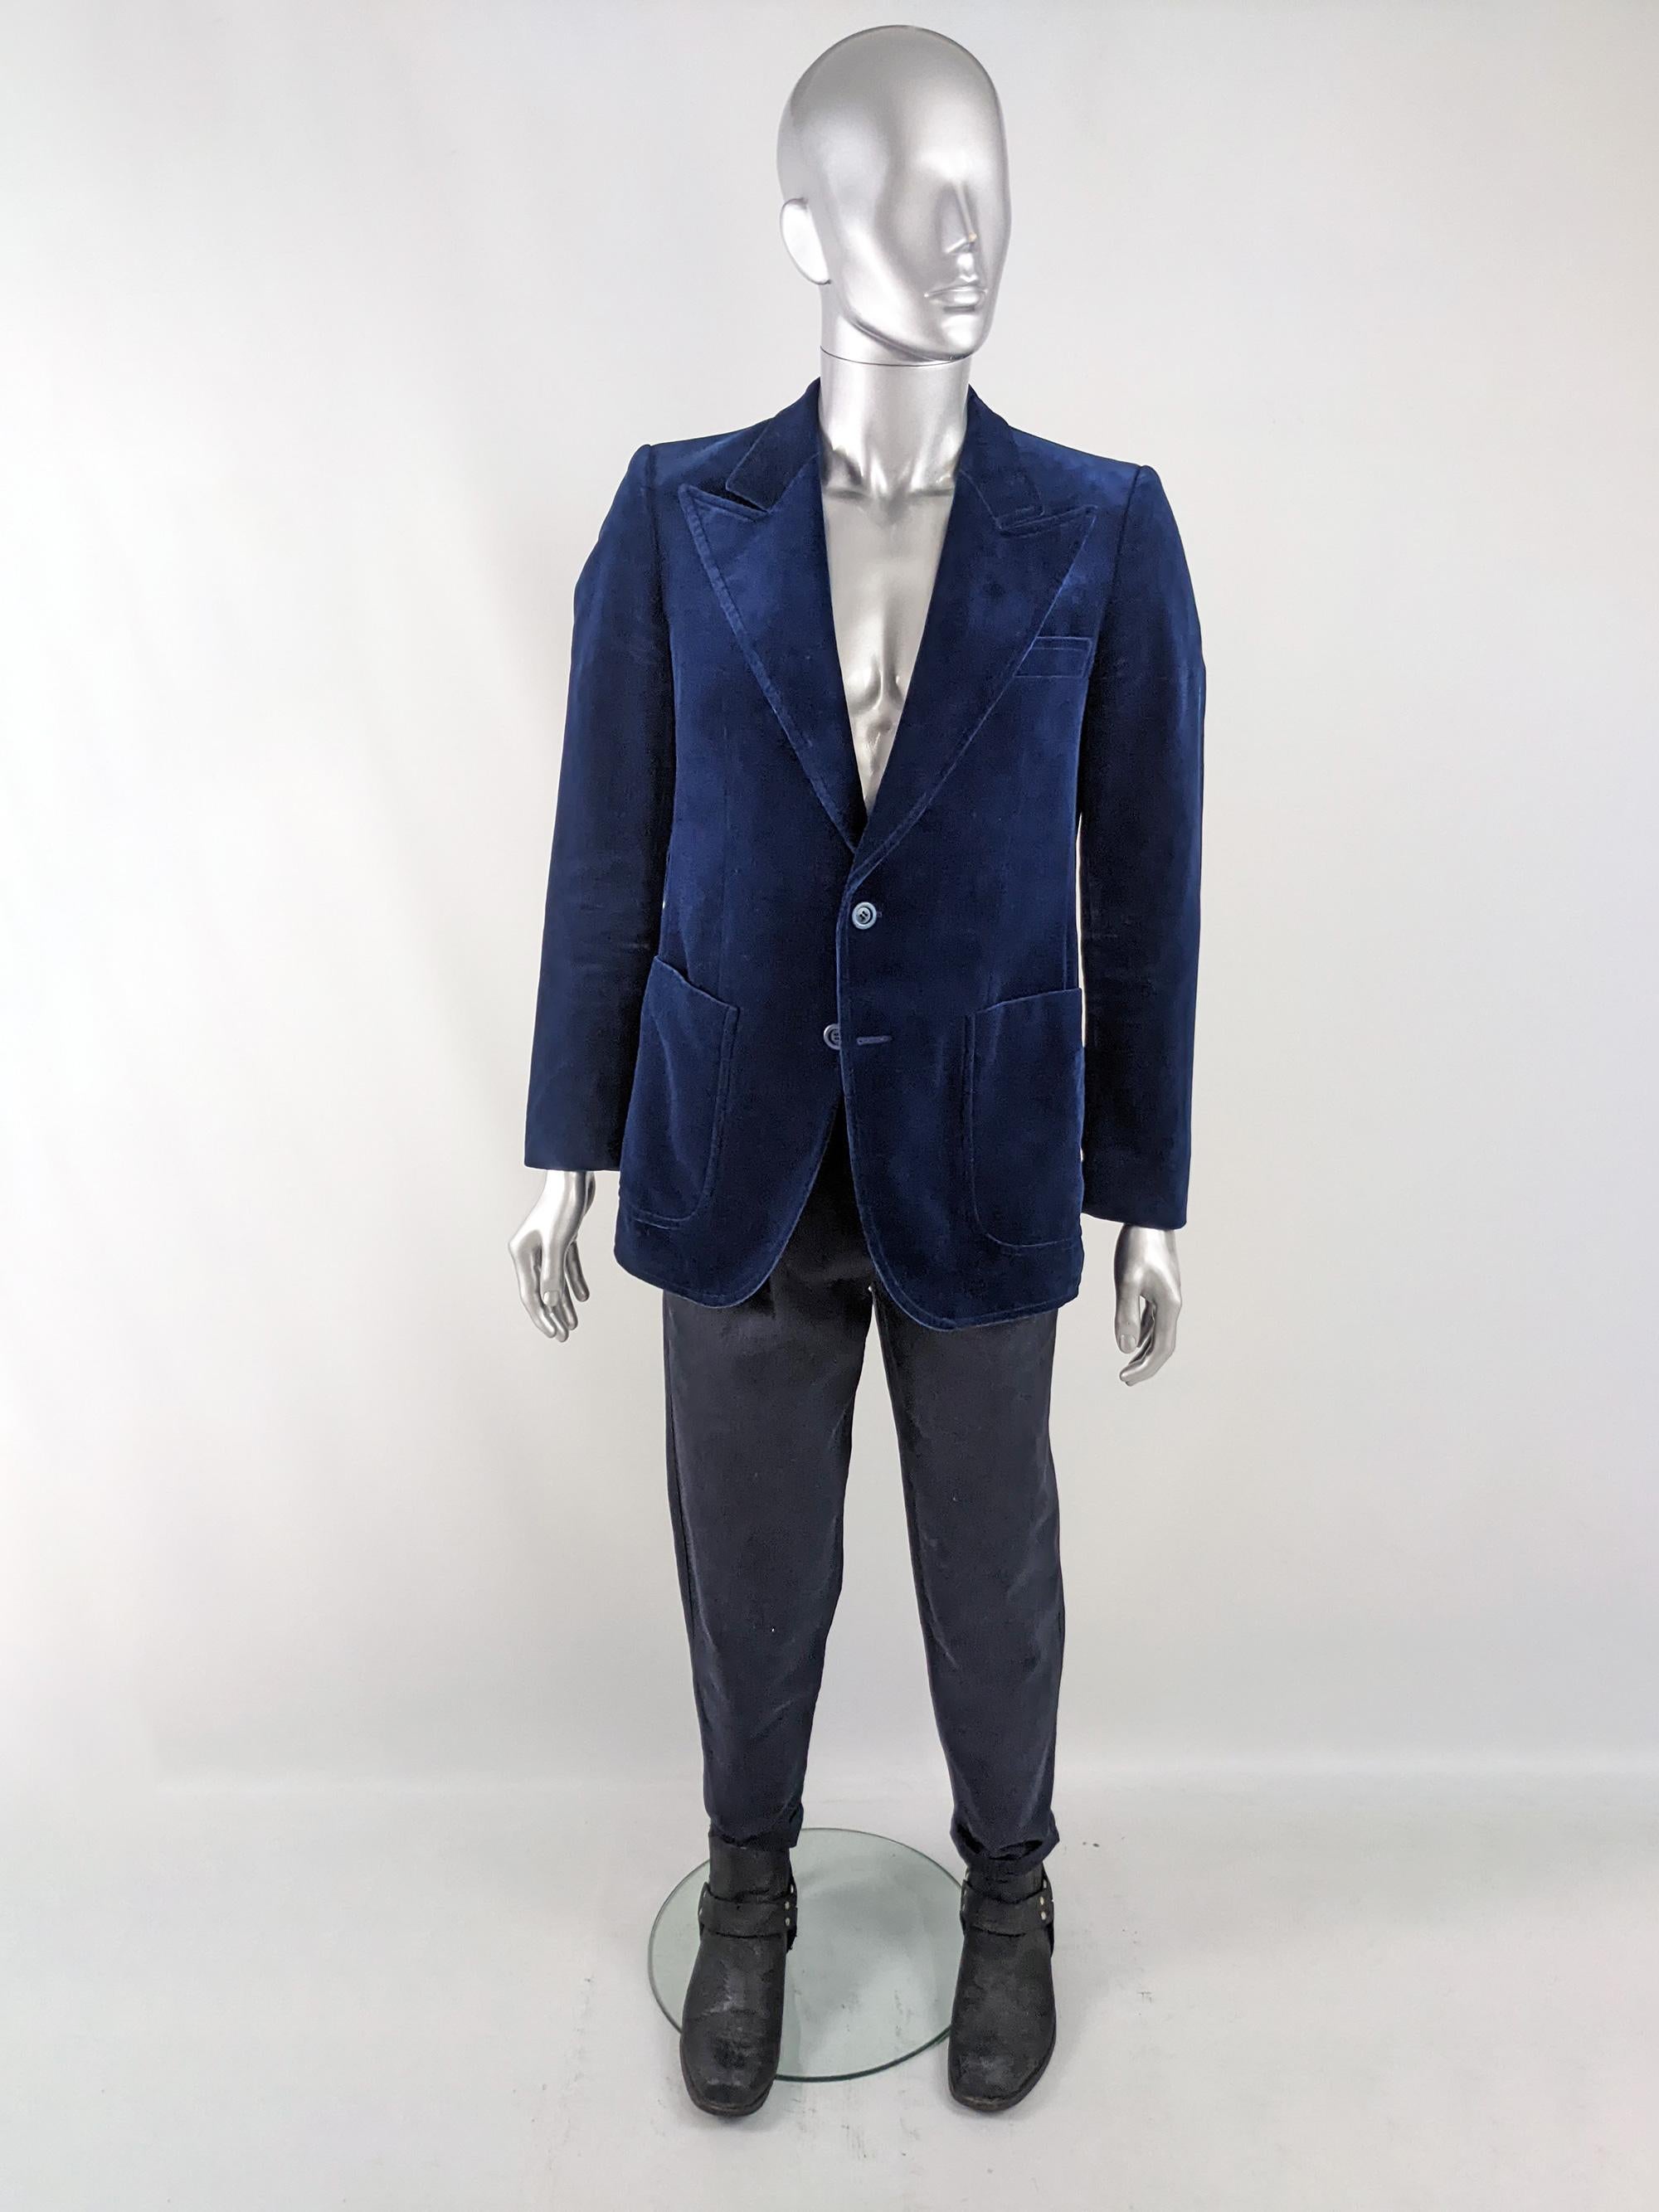 An incredible vintage mens jacket from the 70s by European label, Joba International. In a deep, rich blue velvet with amazing 1970s flair created by the wide, peaked lapels and large patch pockets.

Size: Unlabelled; measures roughly like a modern